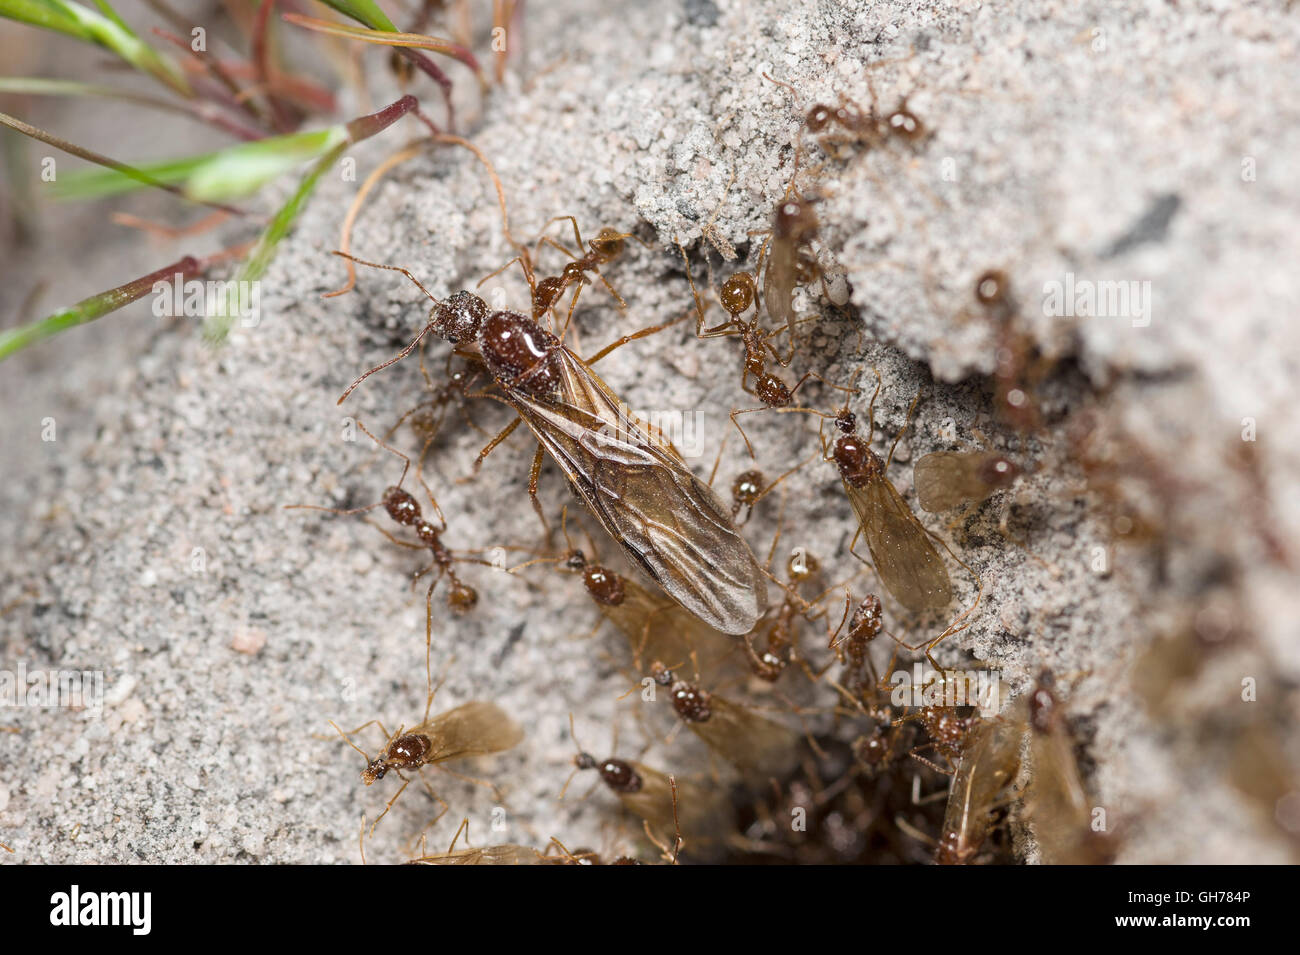 Nuptial flight from ant nest - showing winged adults and worker ants Stock Photo